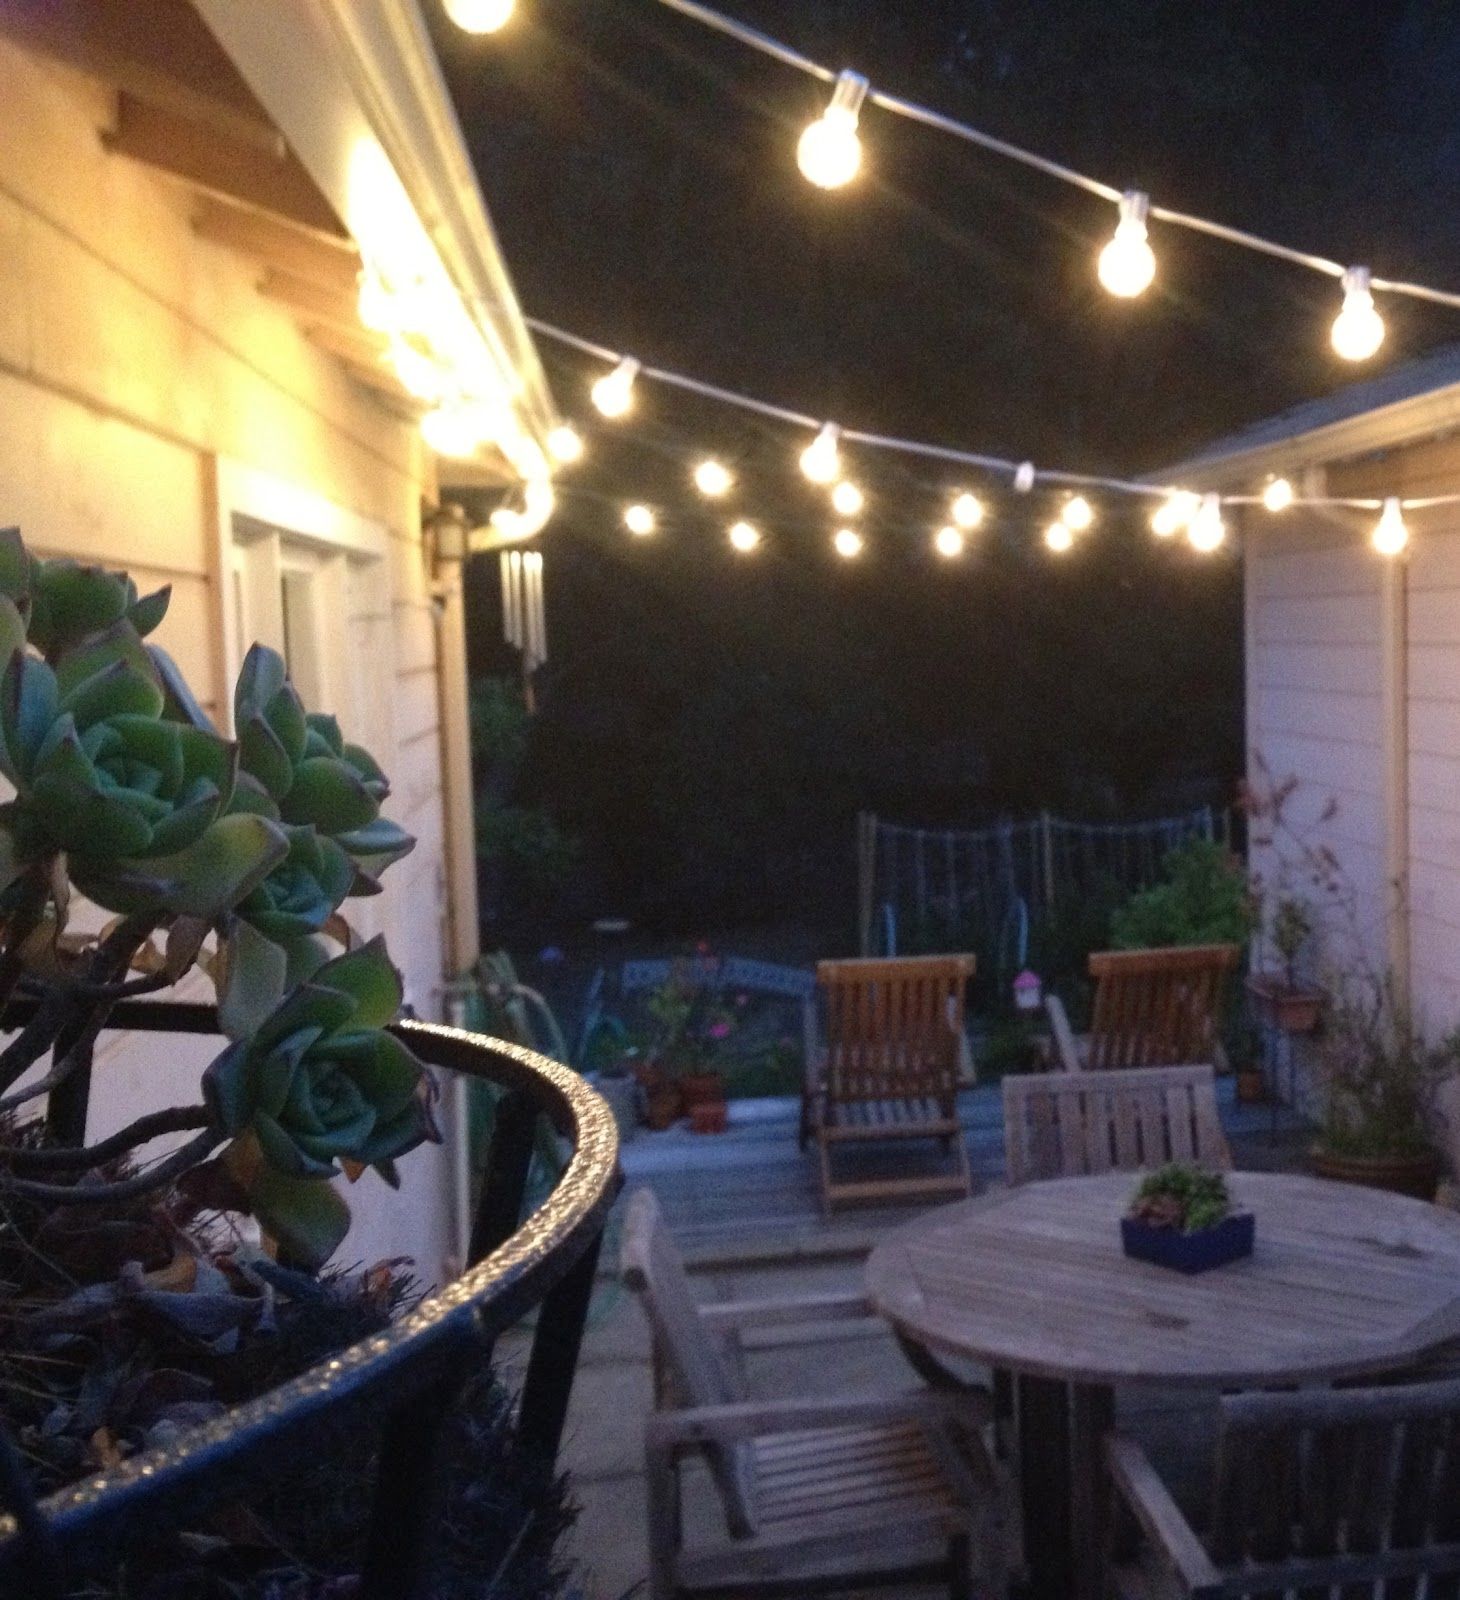 Awesome Patio Light Strings And Solar String Lights Home Depot Regarding Home Depot Outdoor String Lights (View 11 of 15)